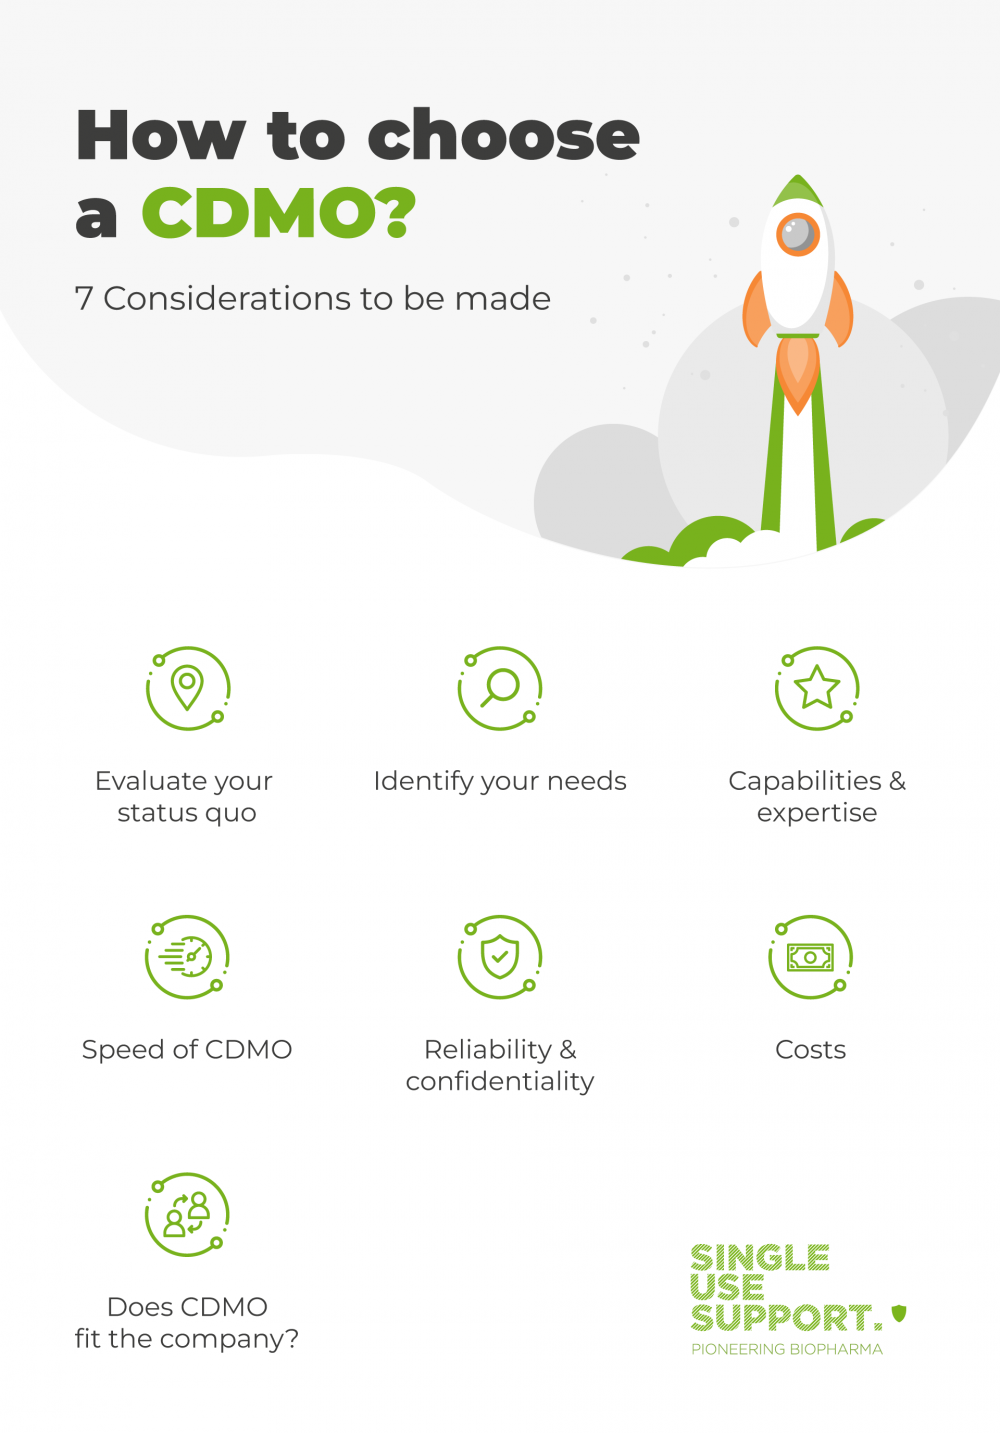 7 Considerations to be made when you choose a CDMO